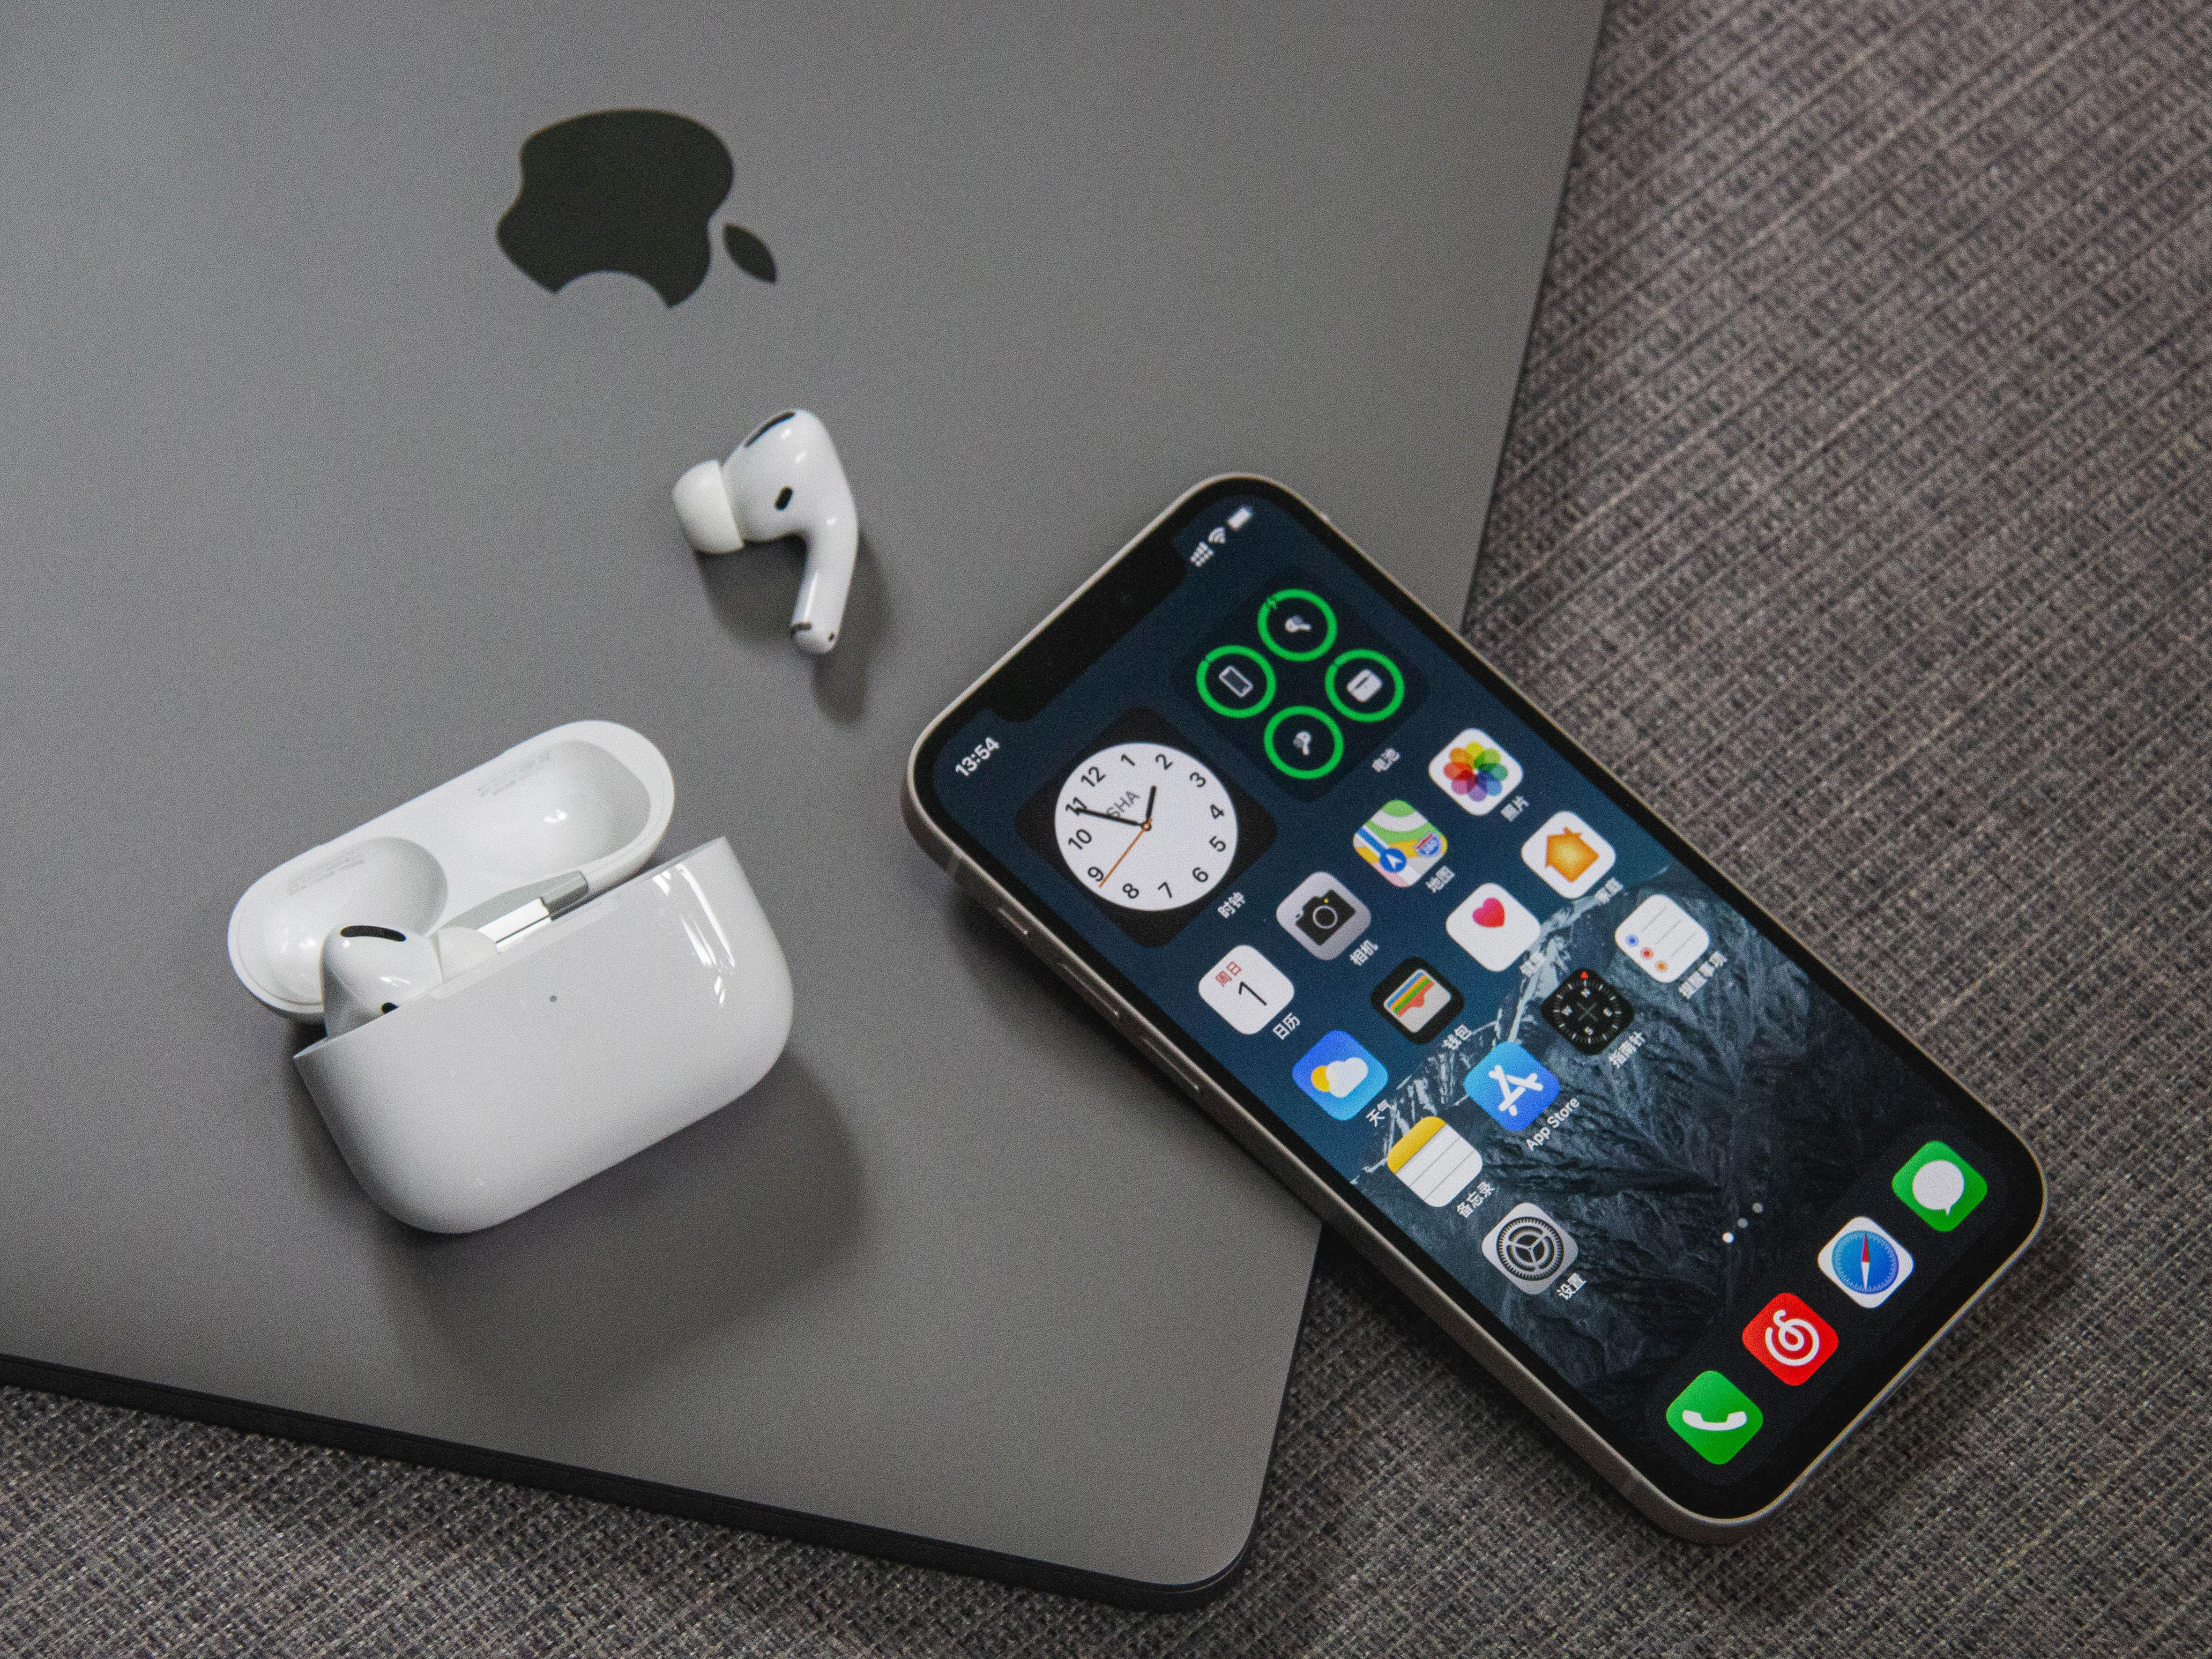 How to Easily Backup Your iPhone to iCloud in 5 Simple Steps